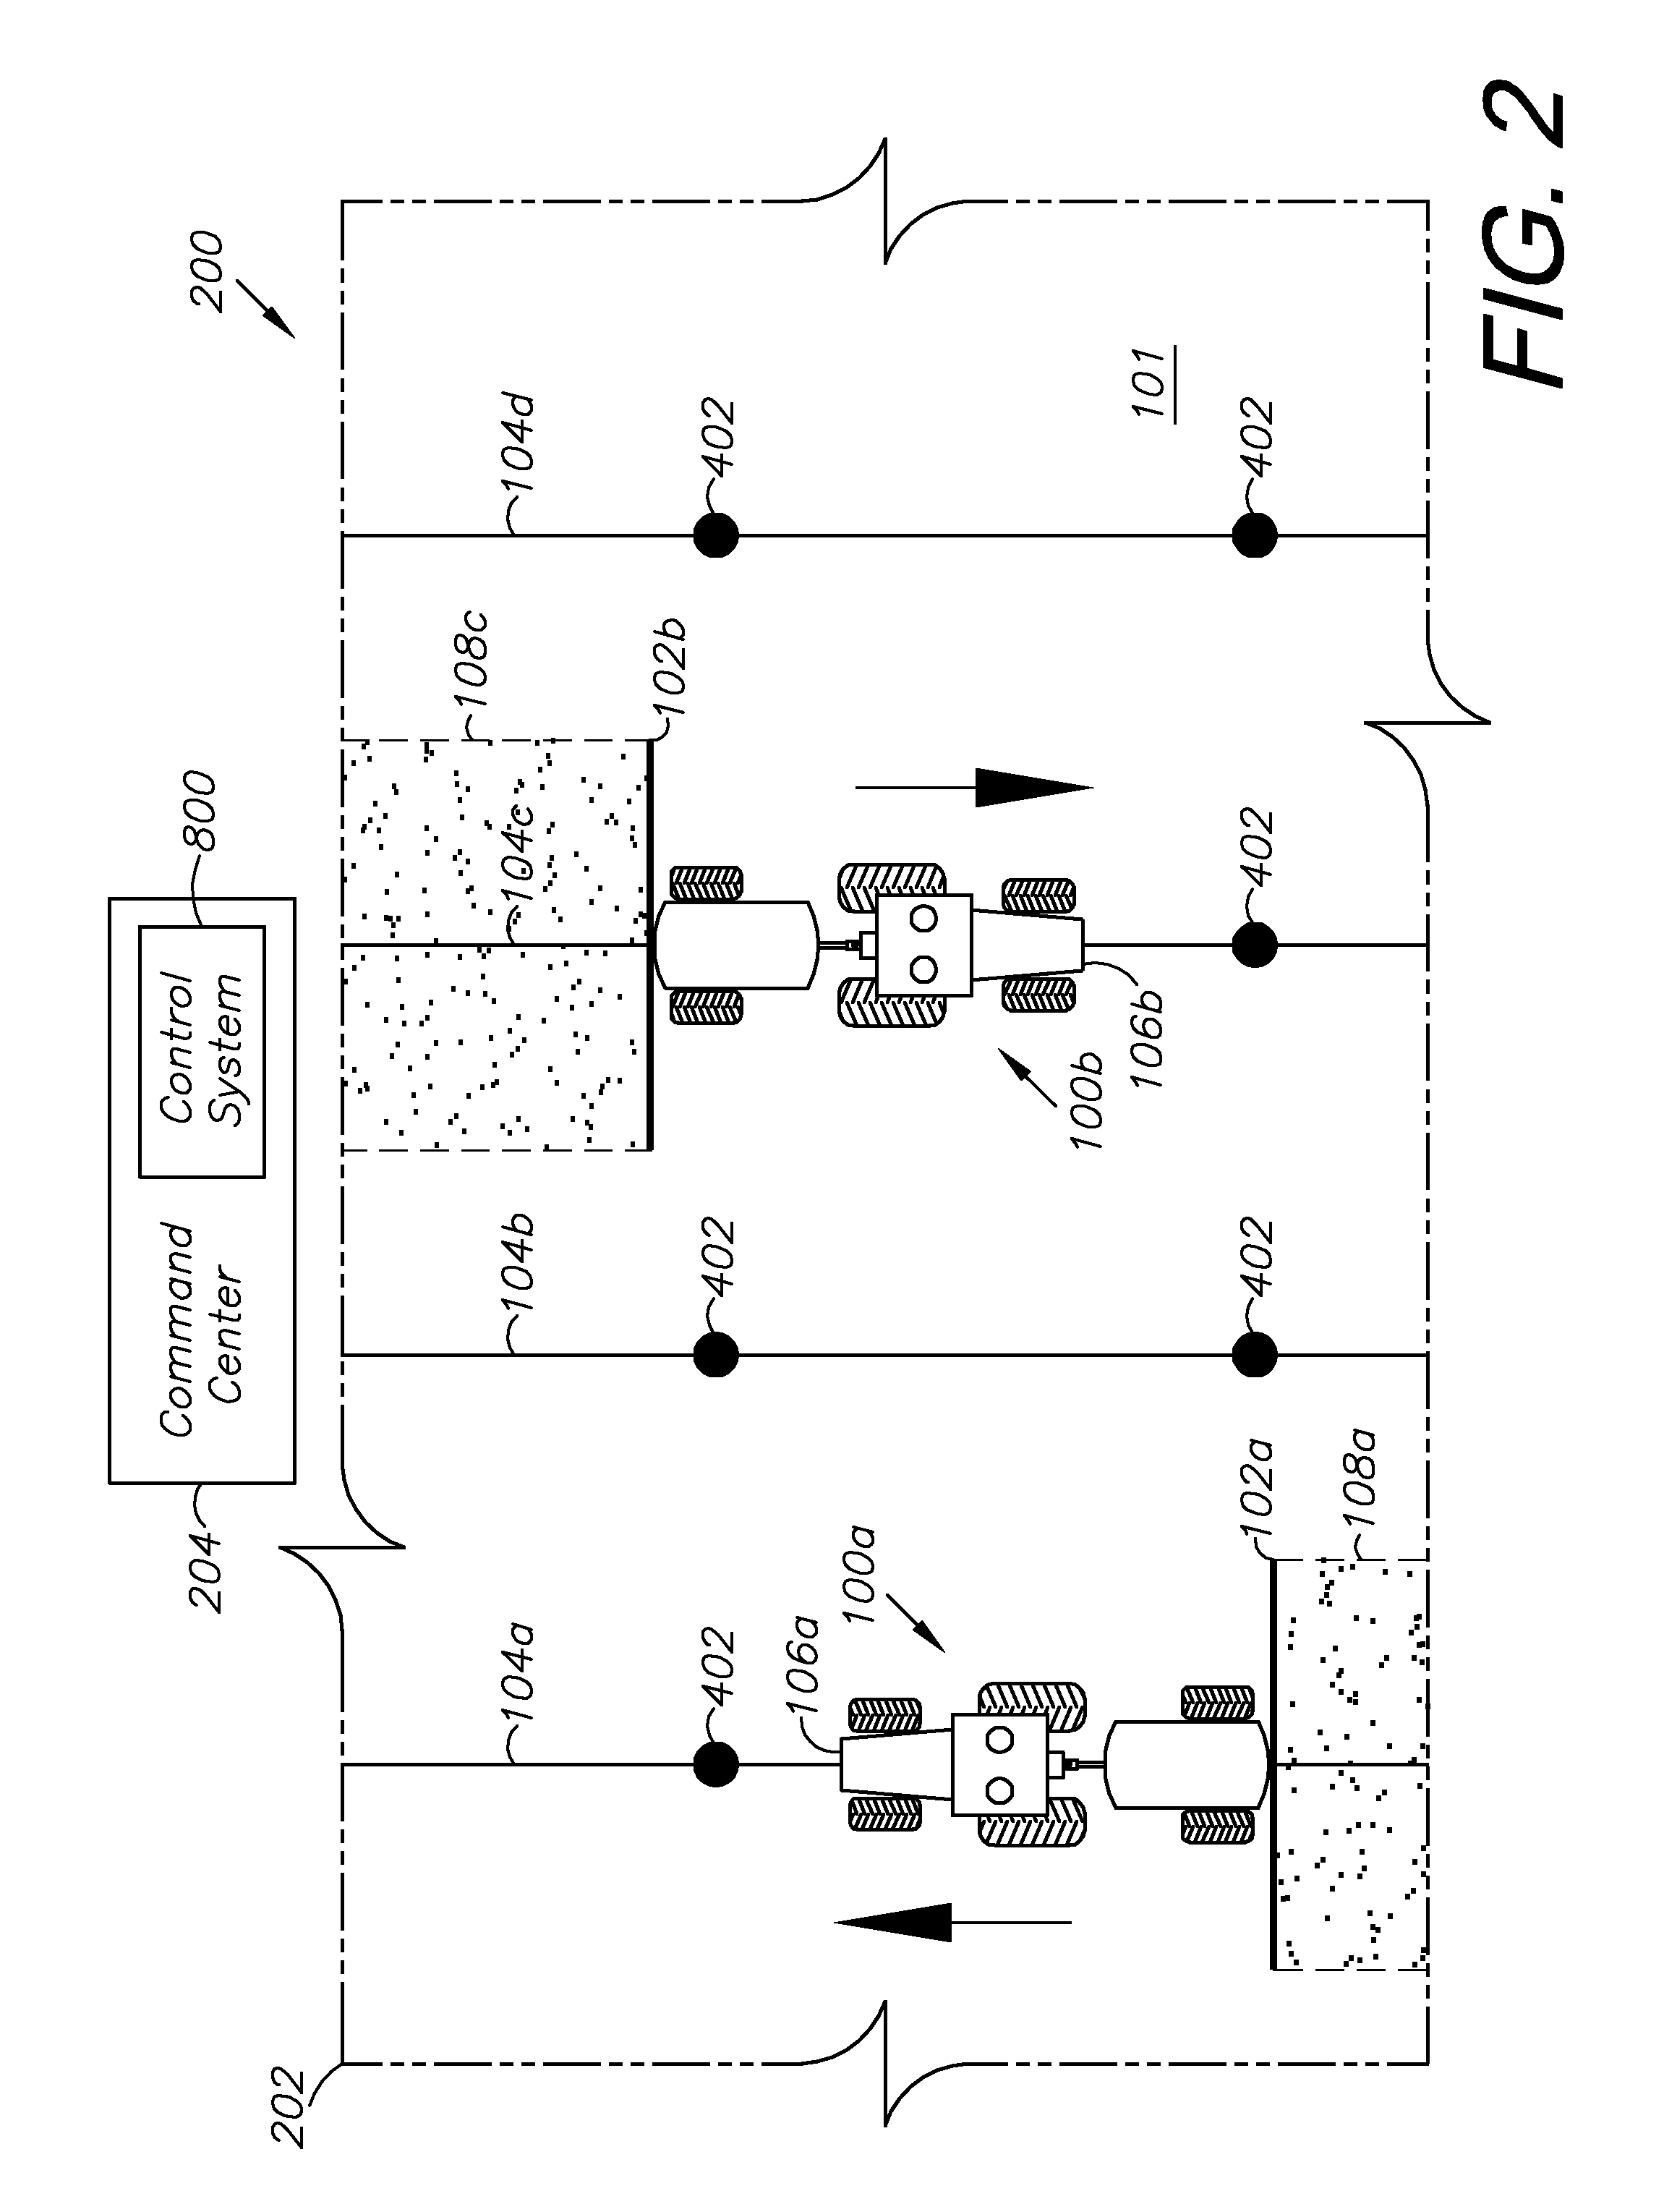 Vehicle assembly control system and method for composing or decomposing a task